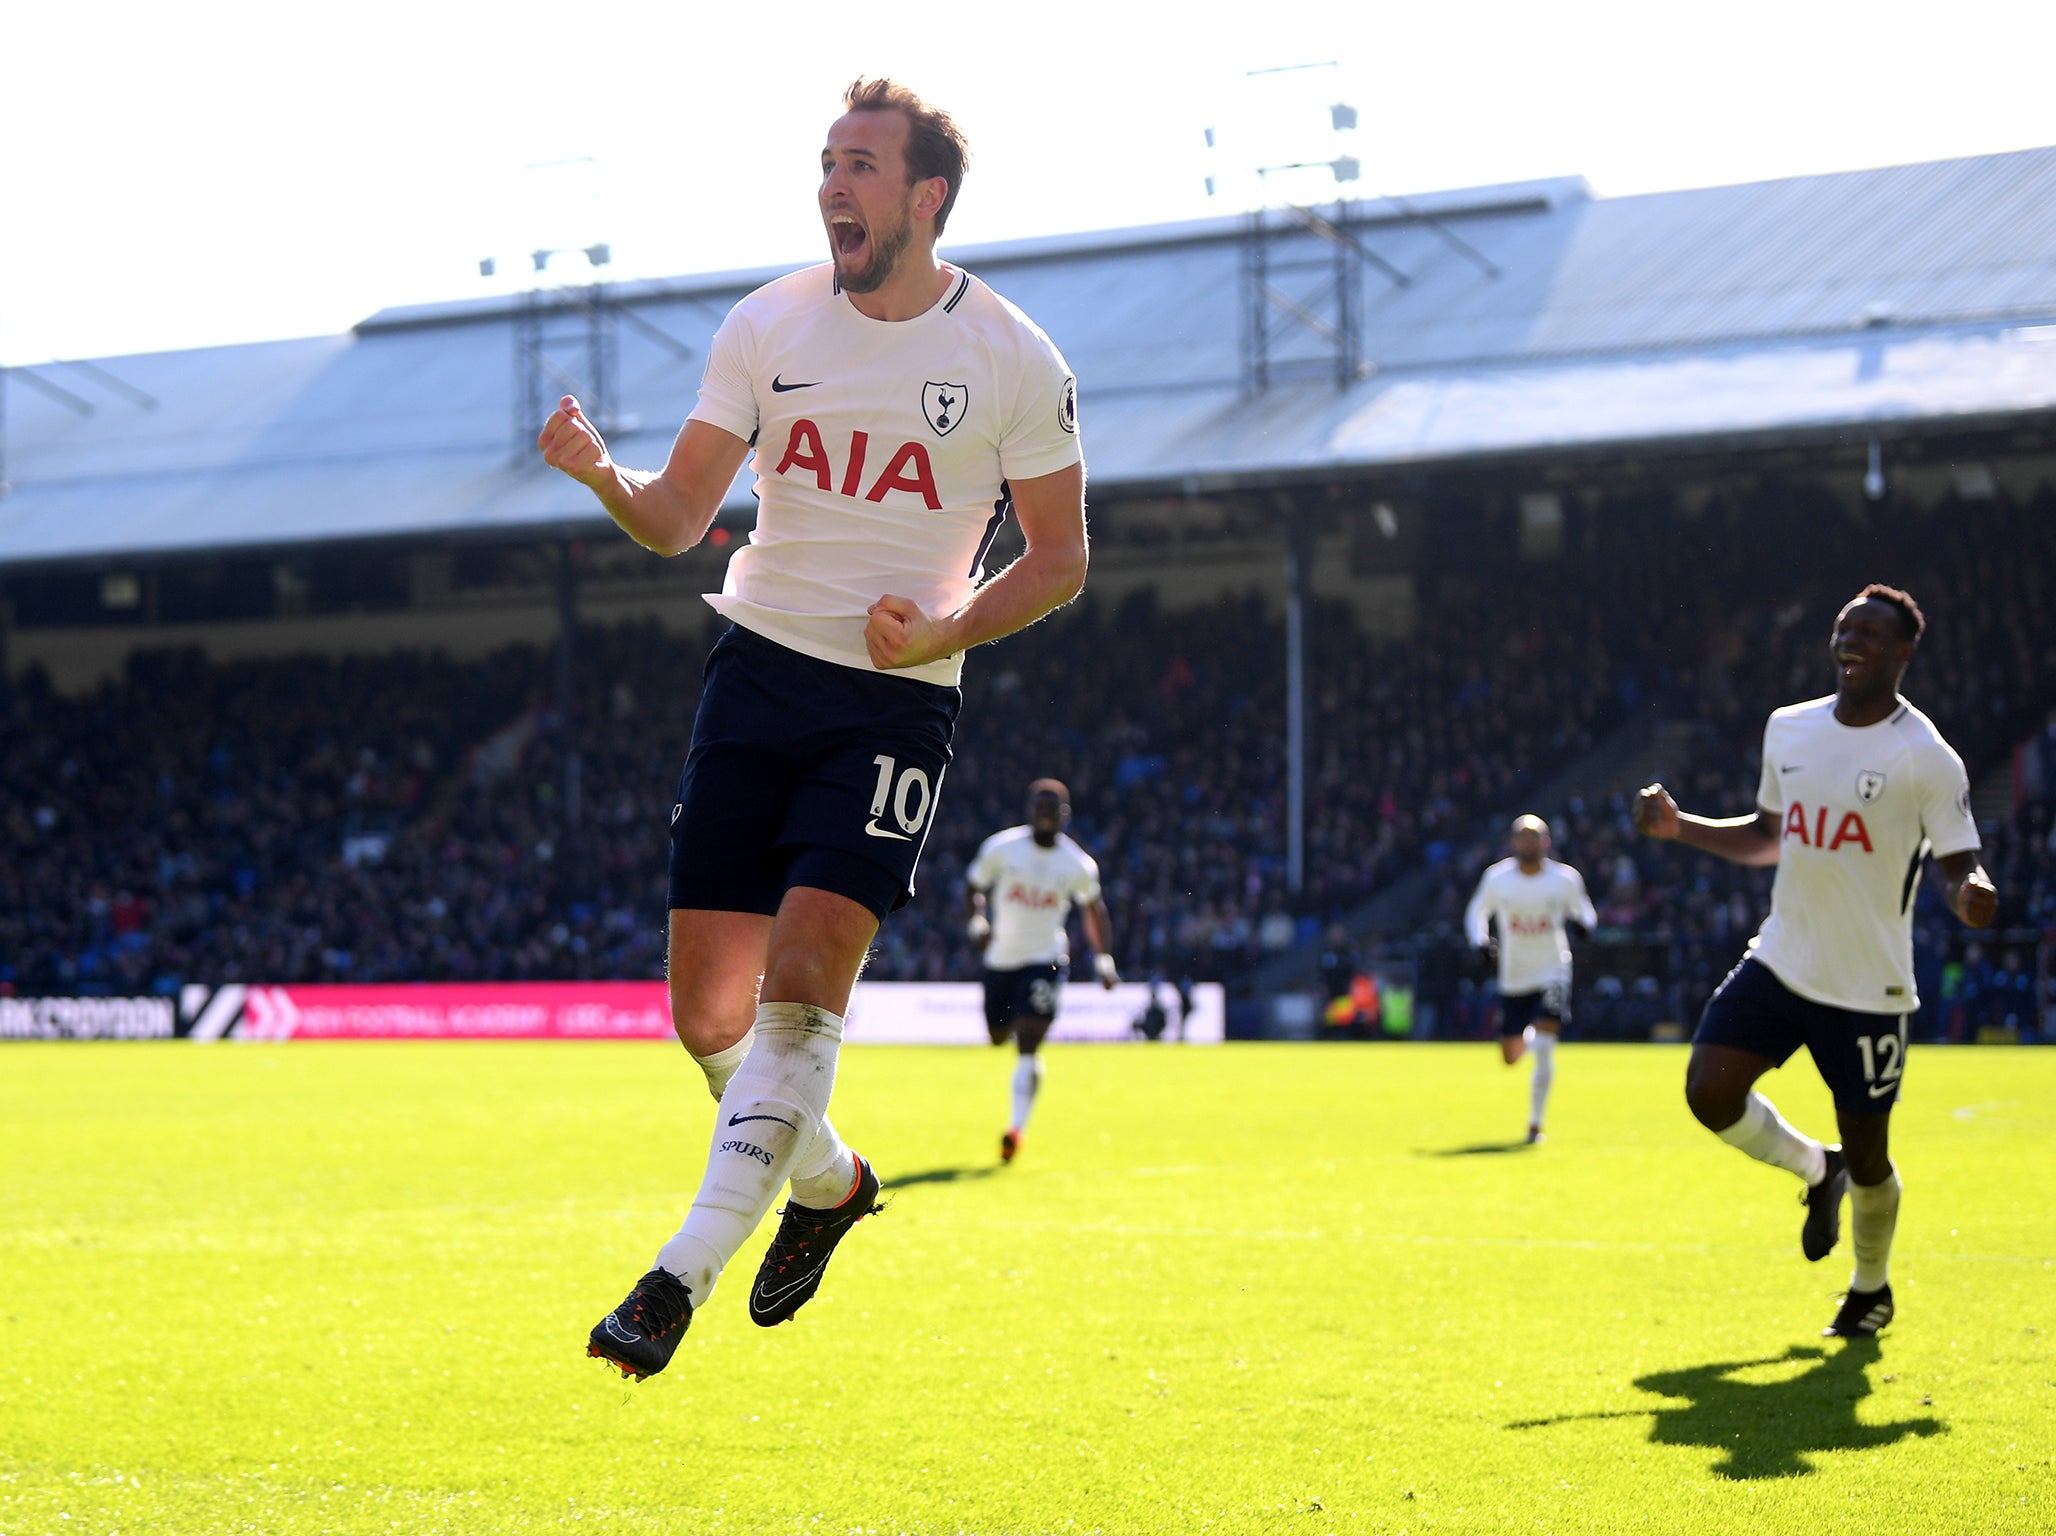 Harry Kane ended Crystal Palace's resistance